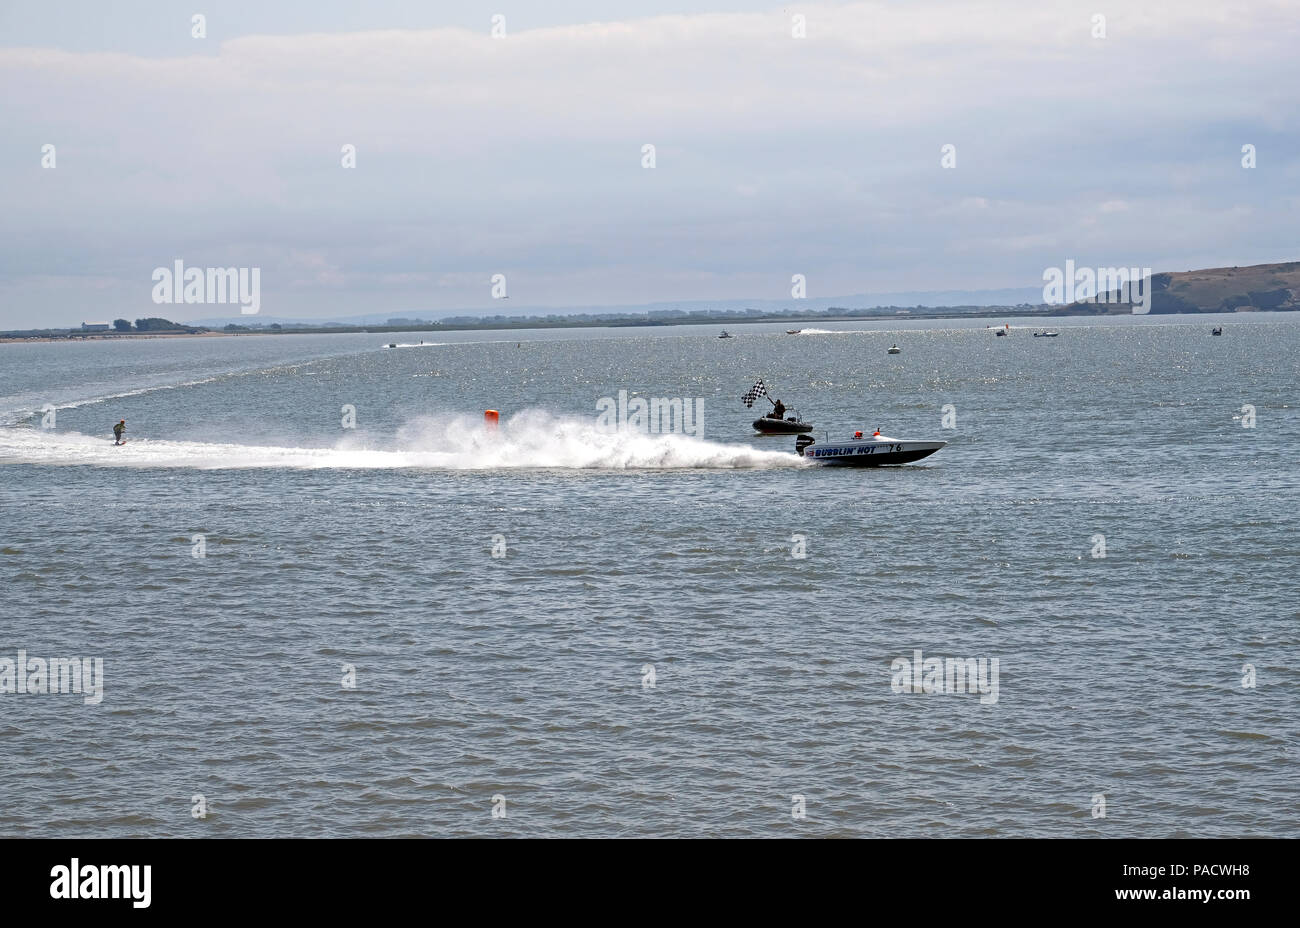 Weston-super-Mare, UK. 21st July, 2018. Waterskiers race around the bay. This regional Formula 2 race was organised by Weston Bay Watersports Club. Keith Ramsey/Alamy Live News Stock Photo